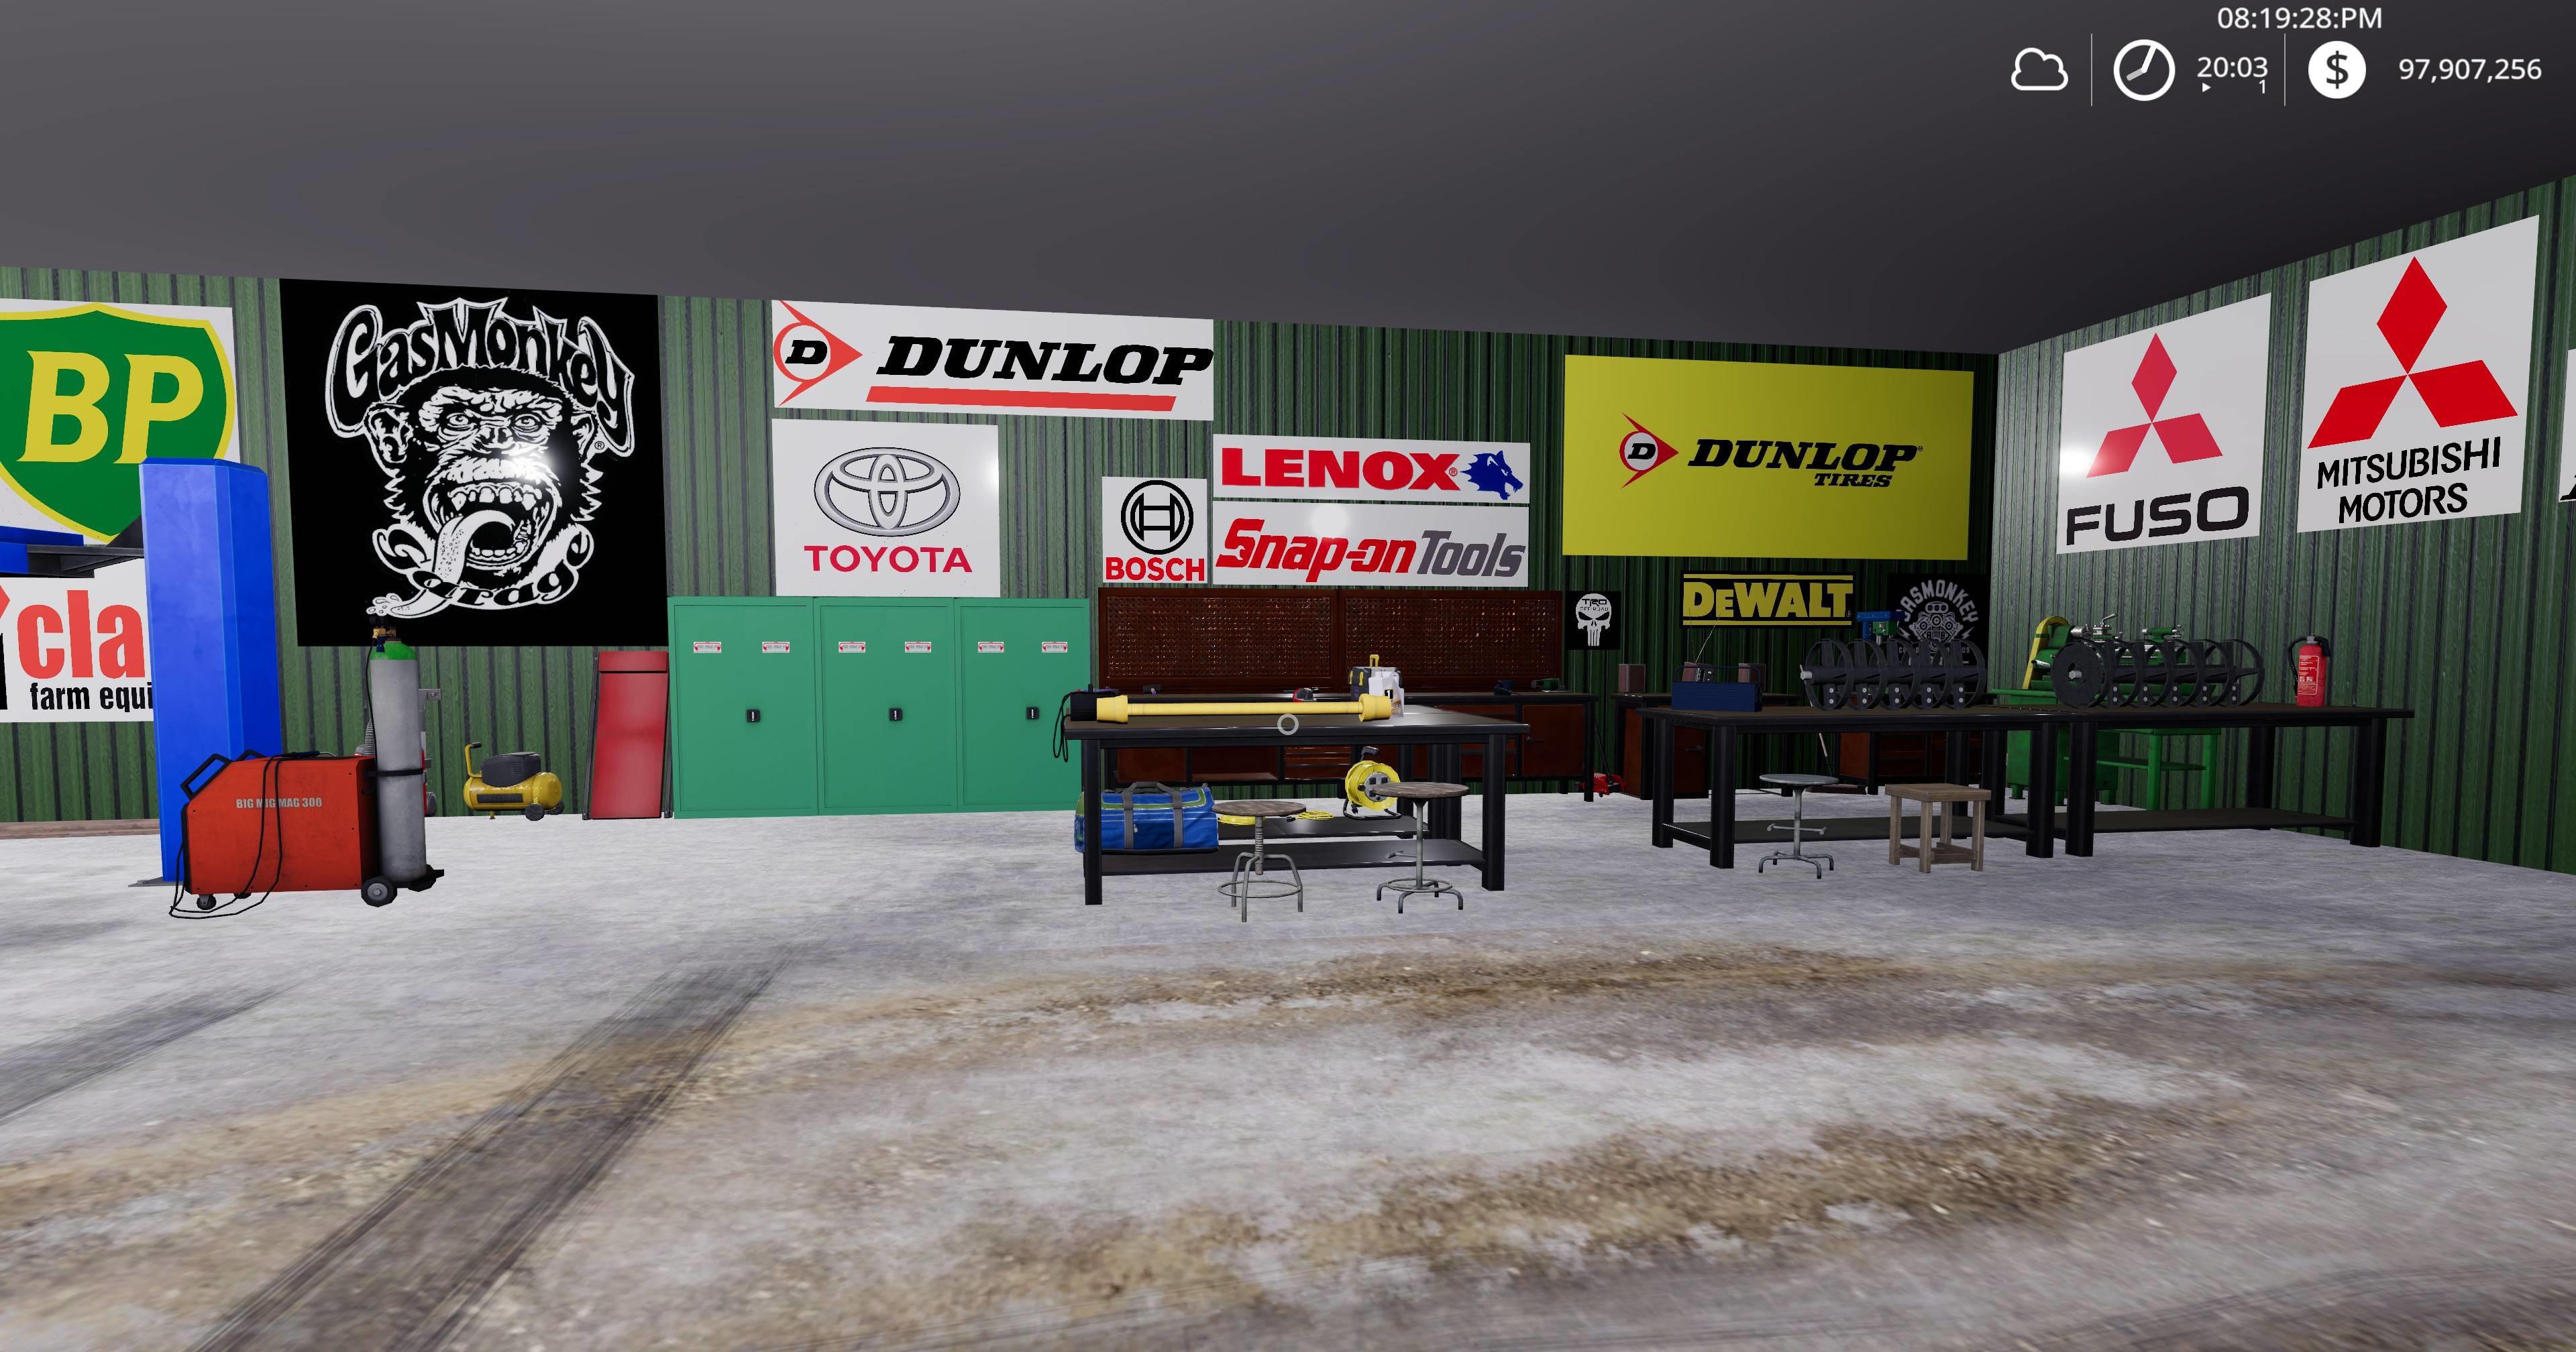 fs 19 ac 2500s placable shed pack v1.1 - farming simulator